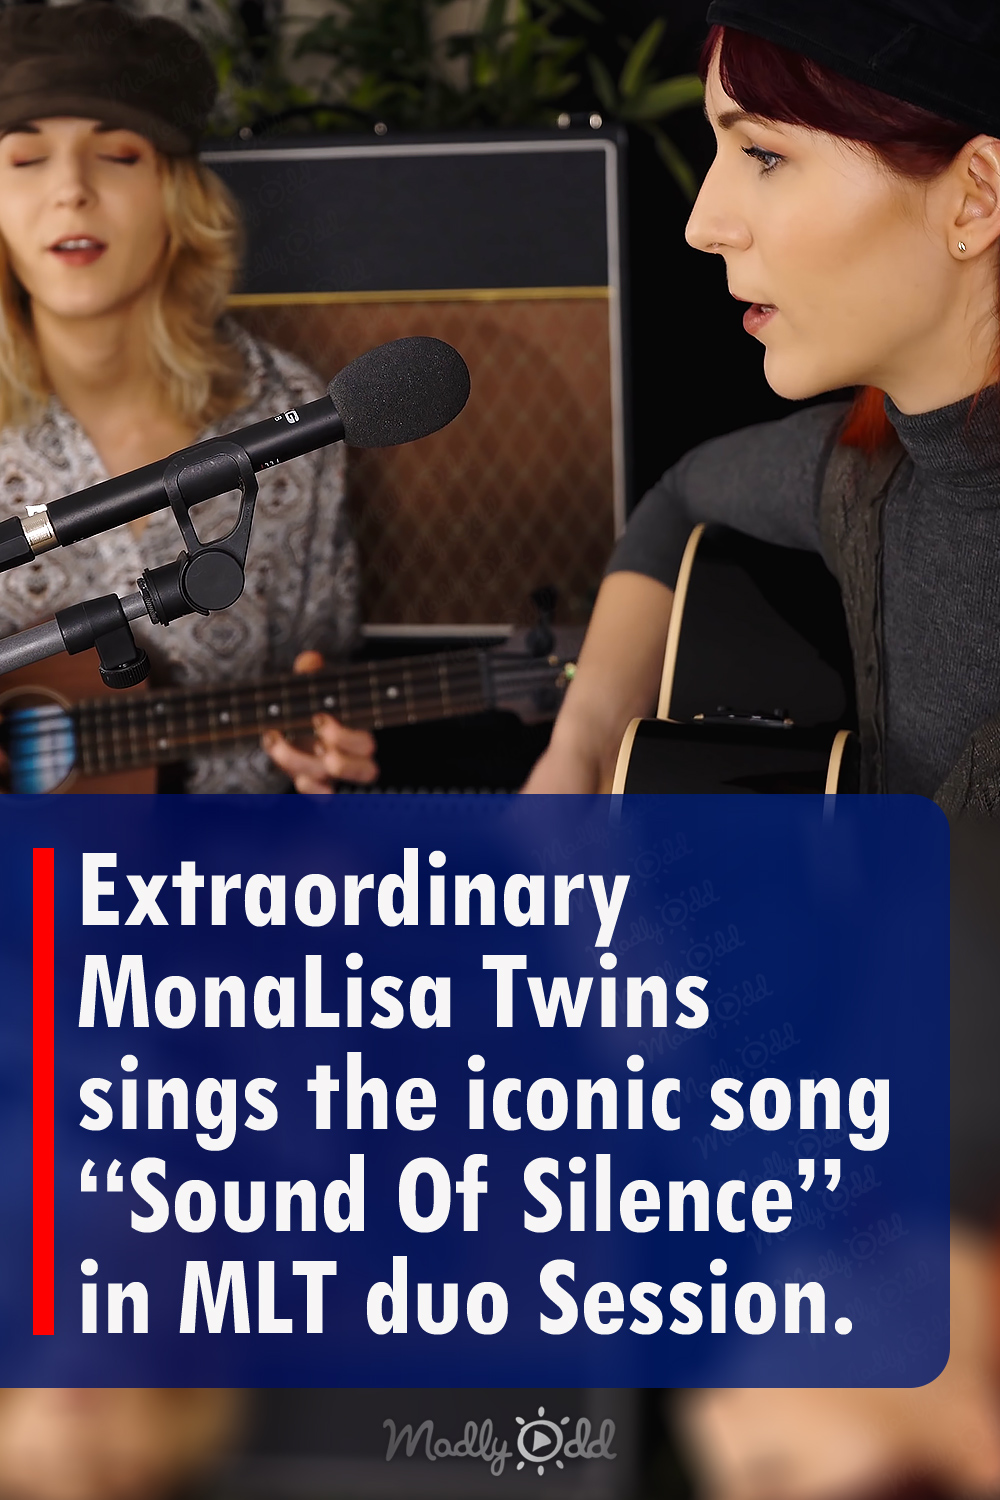 Extraordinary MonaLisa Twins sings the iconic song “Sound Of Silence” in MLT duo Session.